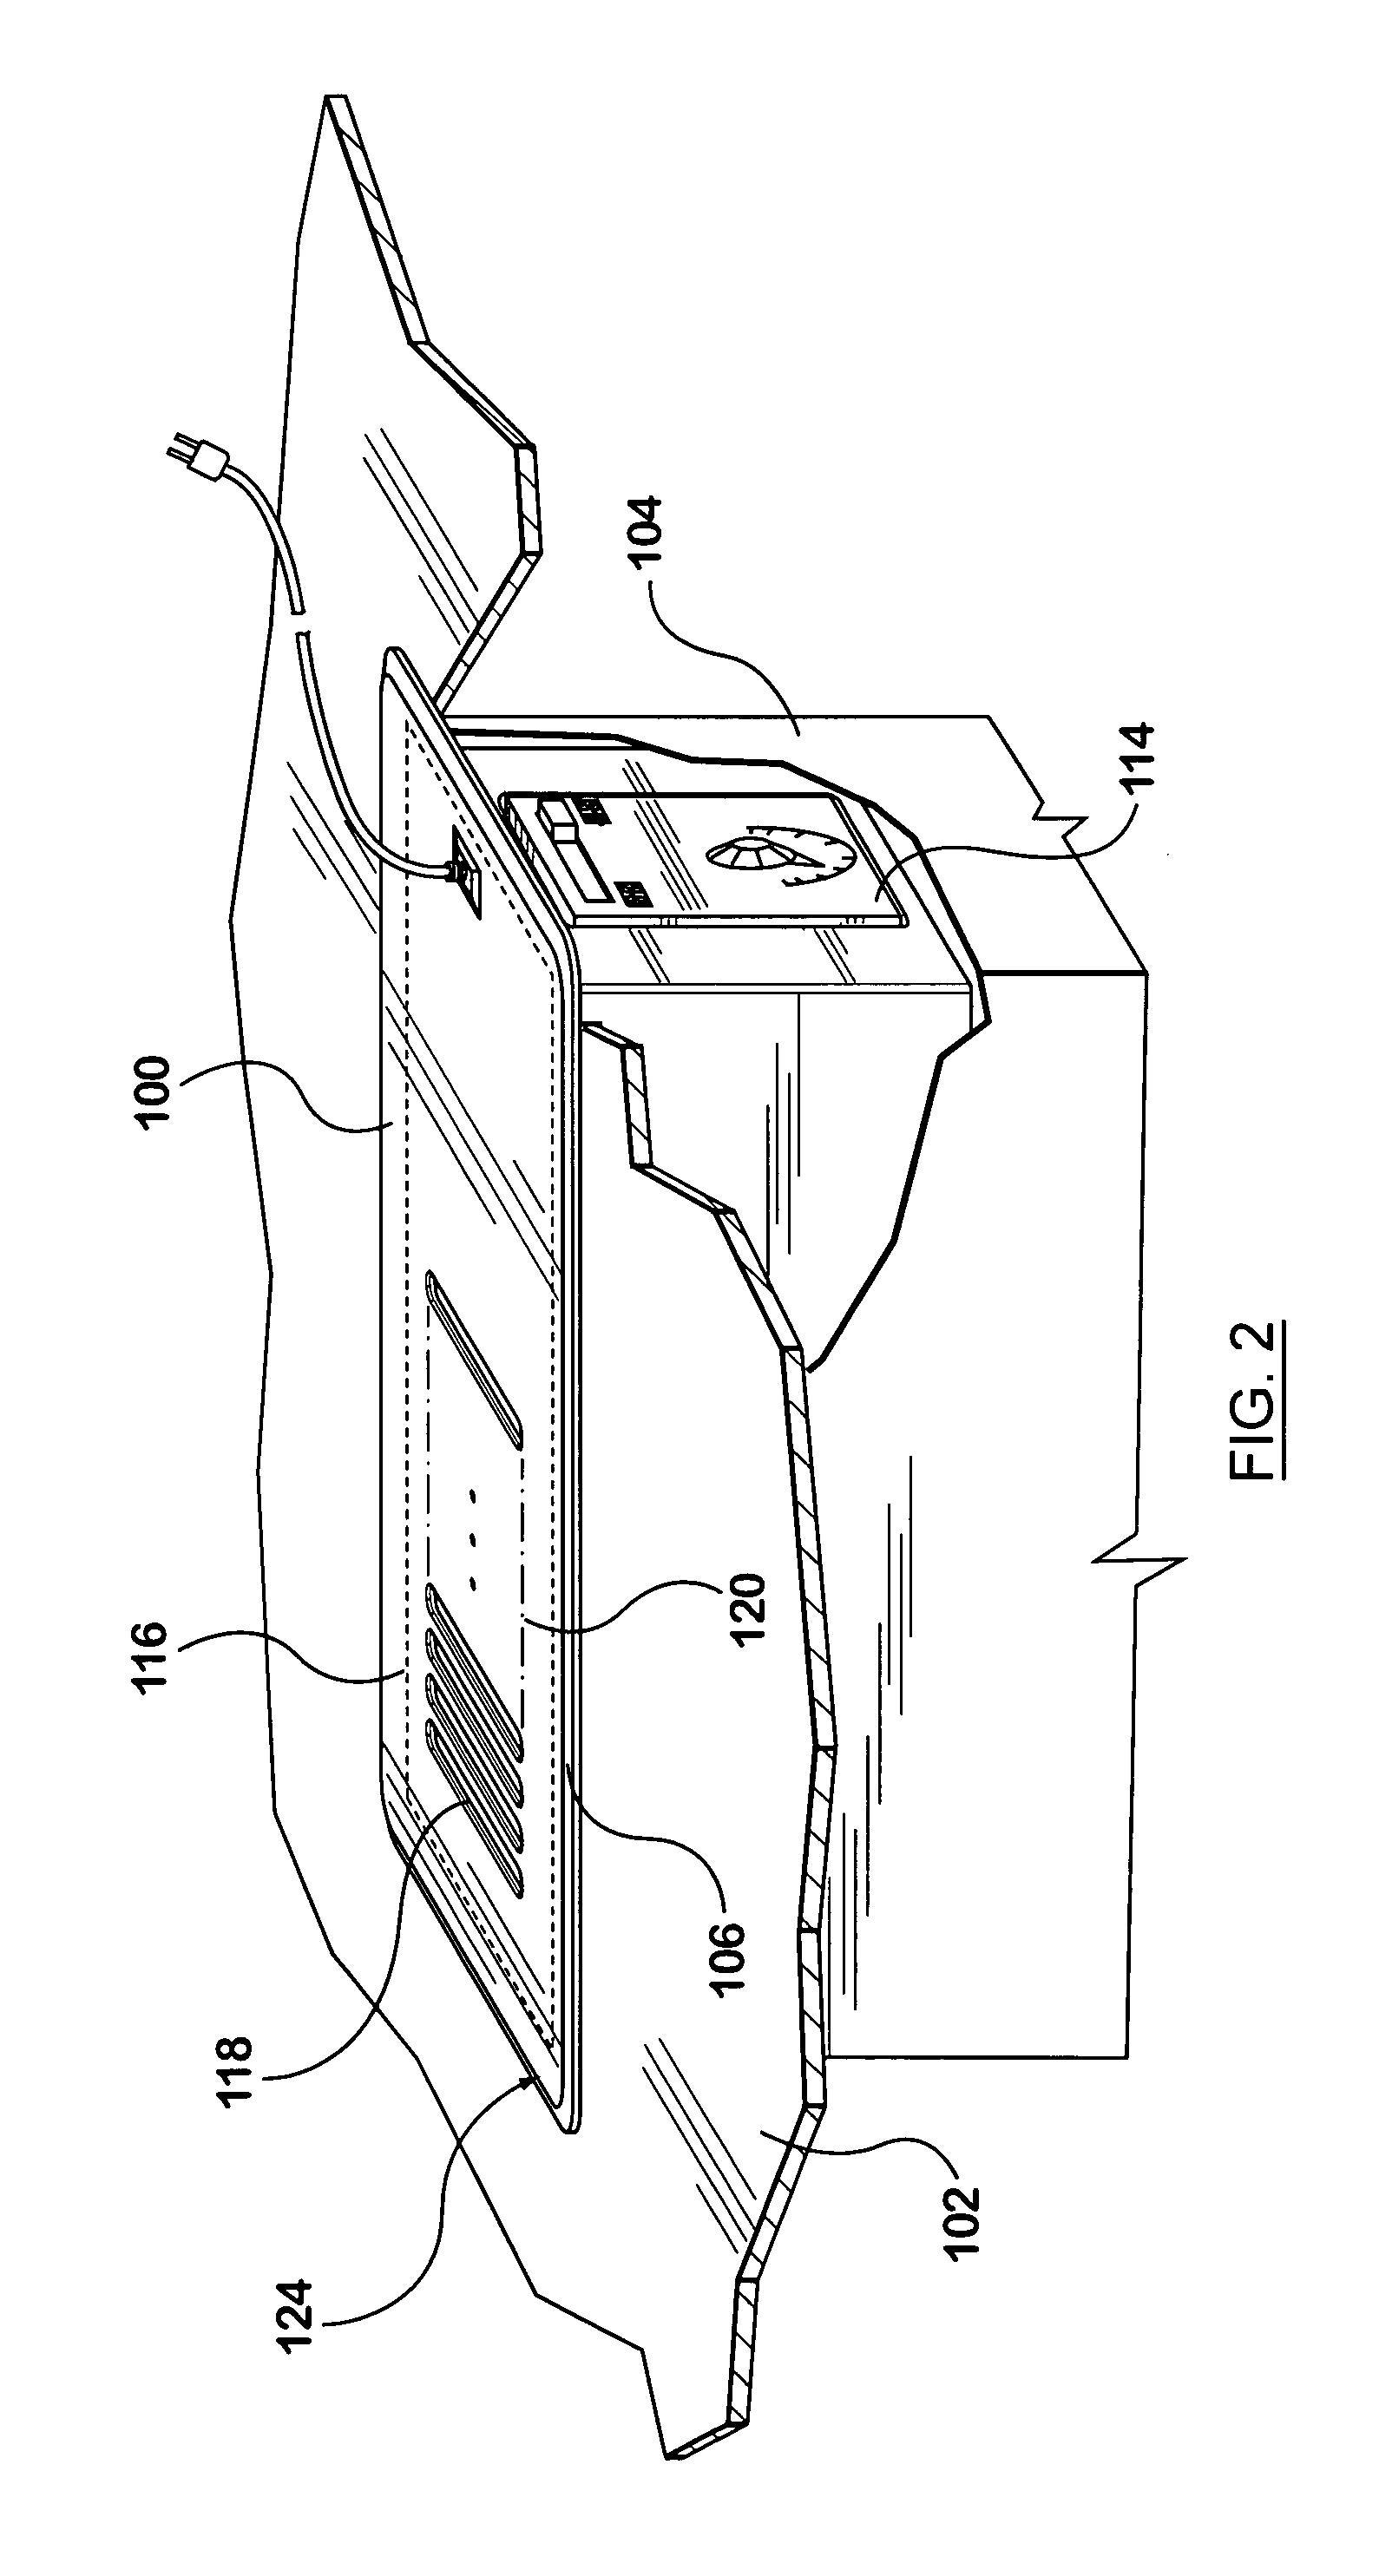 Airflow boosting assembly for a forced air circulation and delivery system